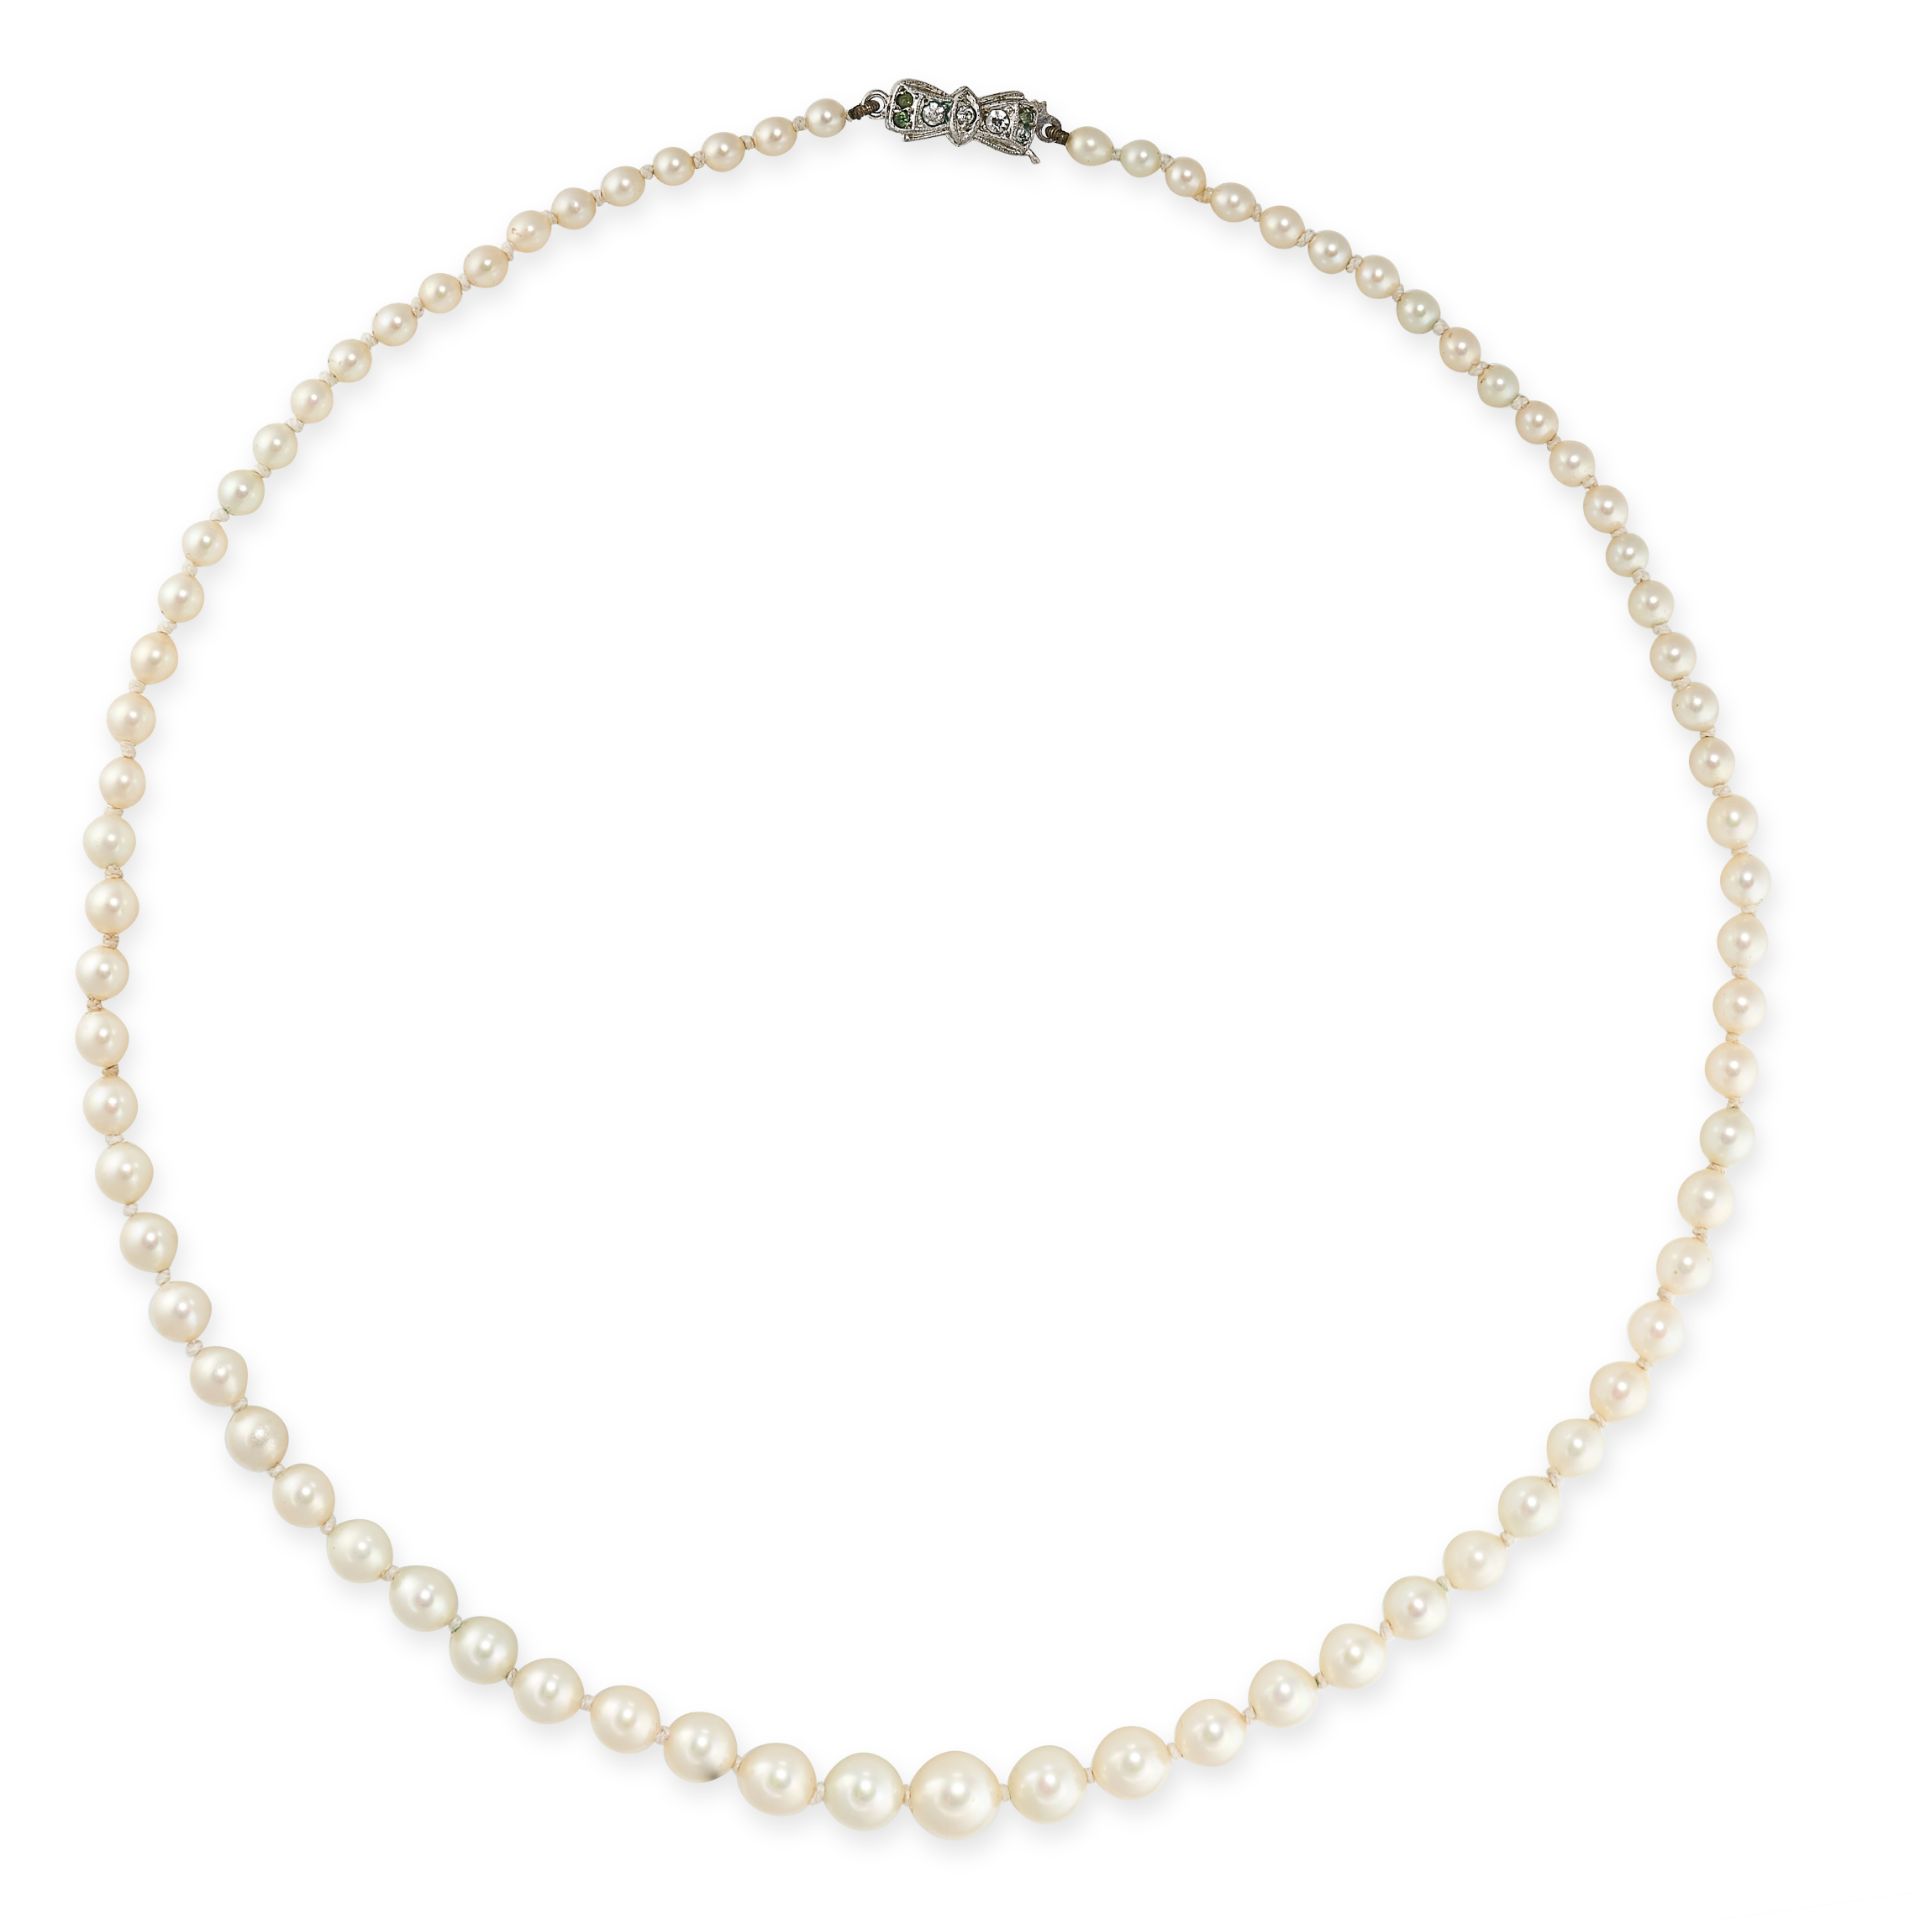 NO RESERVE - A PEARL AND DIAMOND NECKLACE  Made in silver  Seventy six graduated pearls, ranging